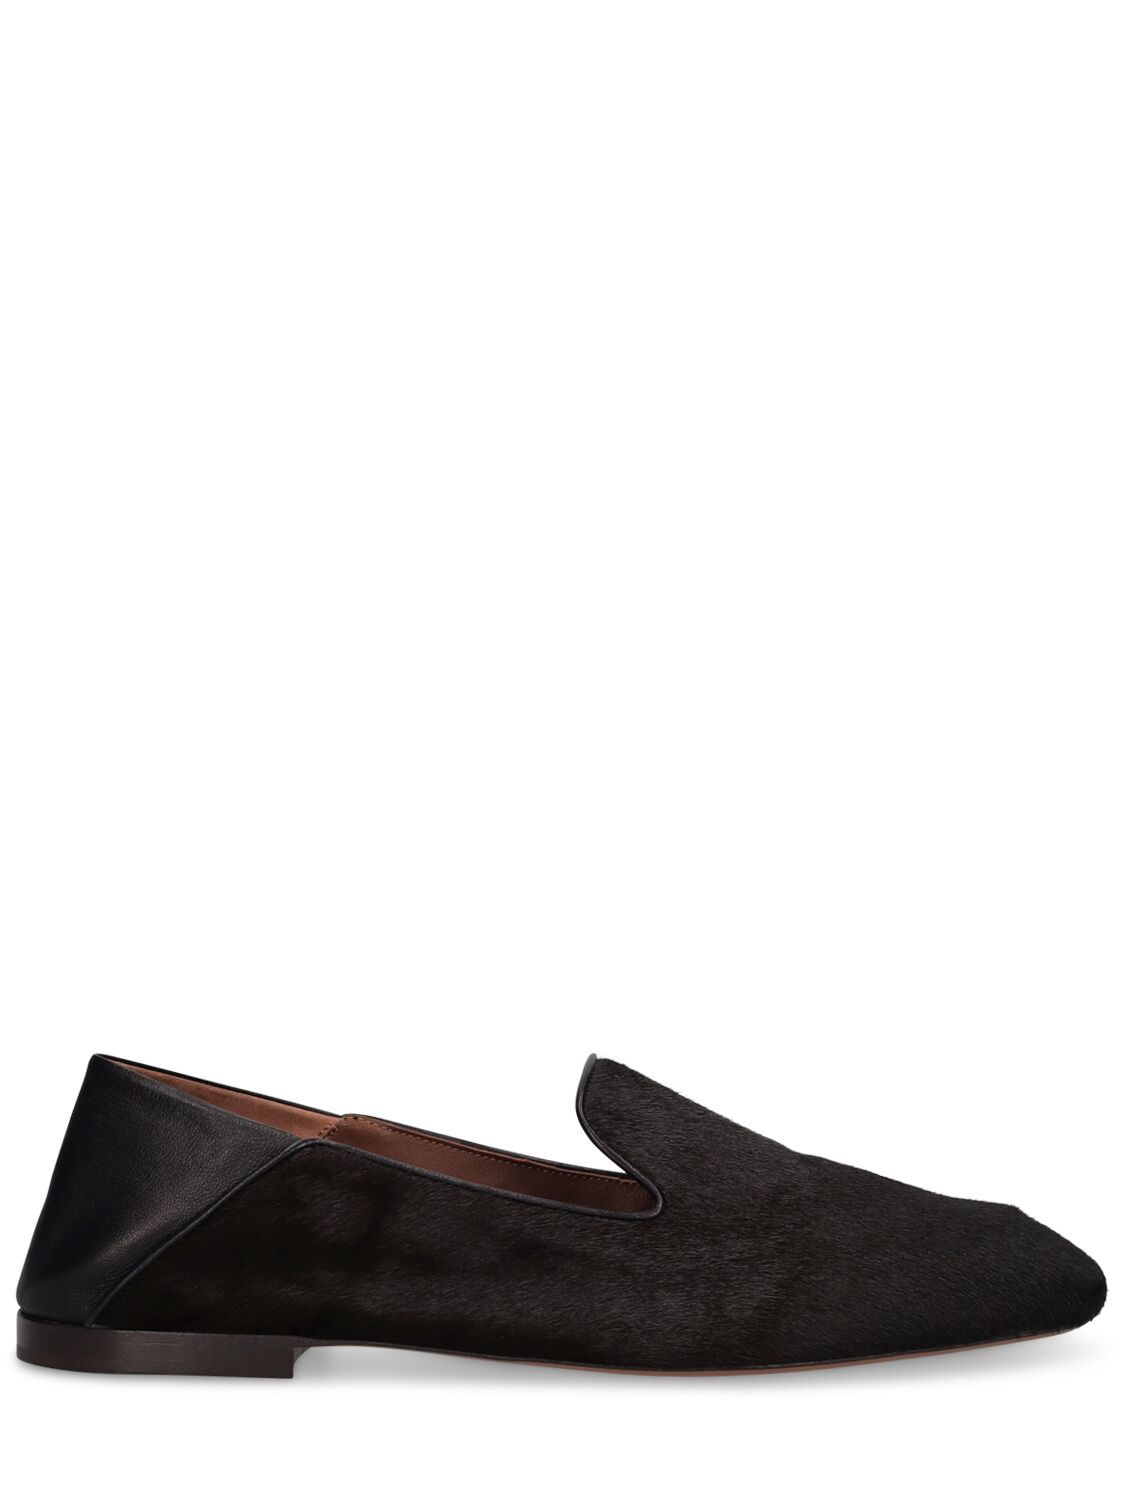 Wales Bonner Flat Leather Loafers In Dark Brown